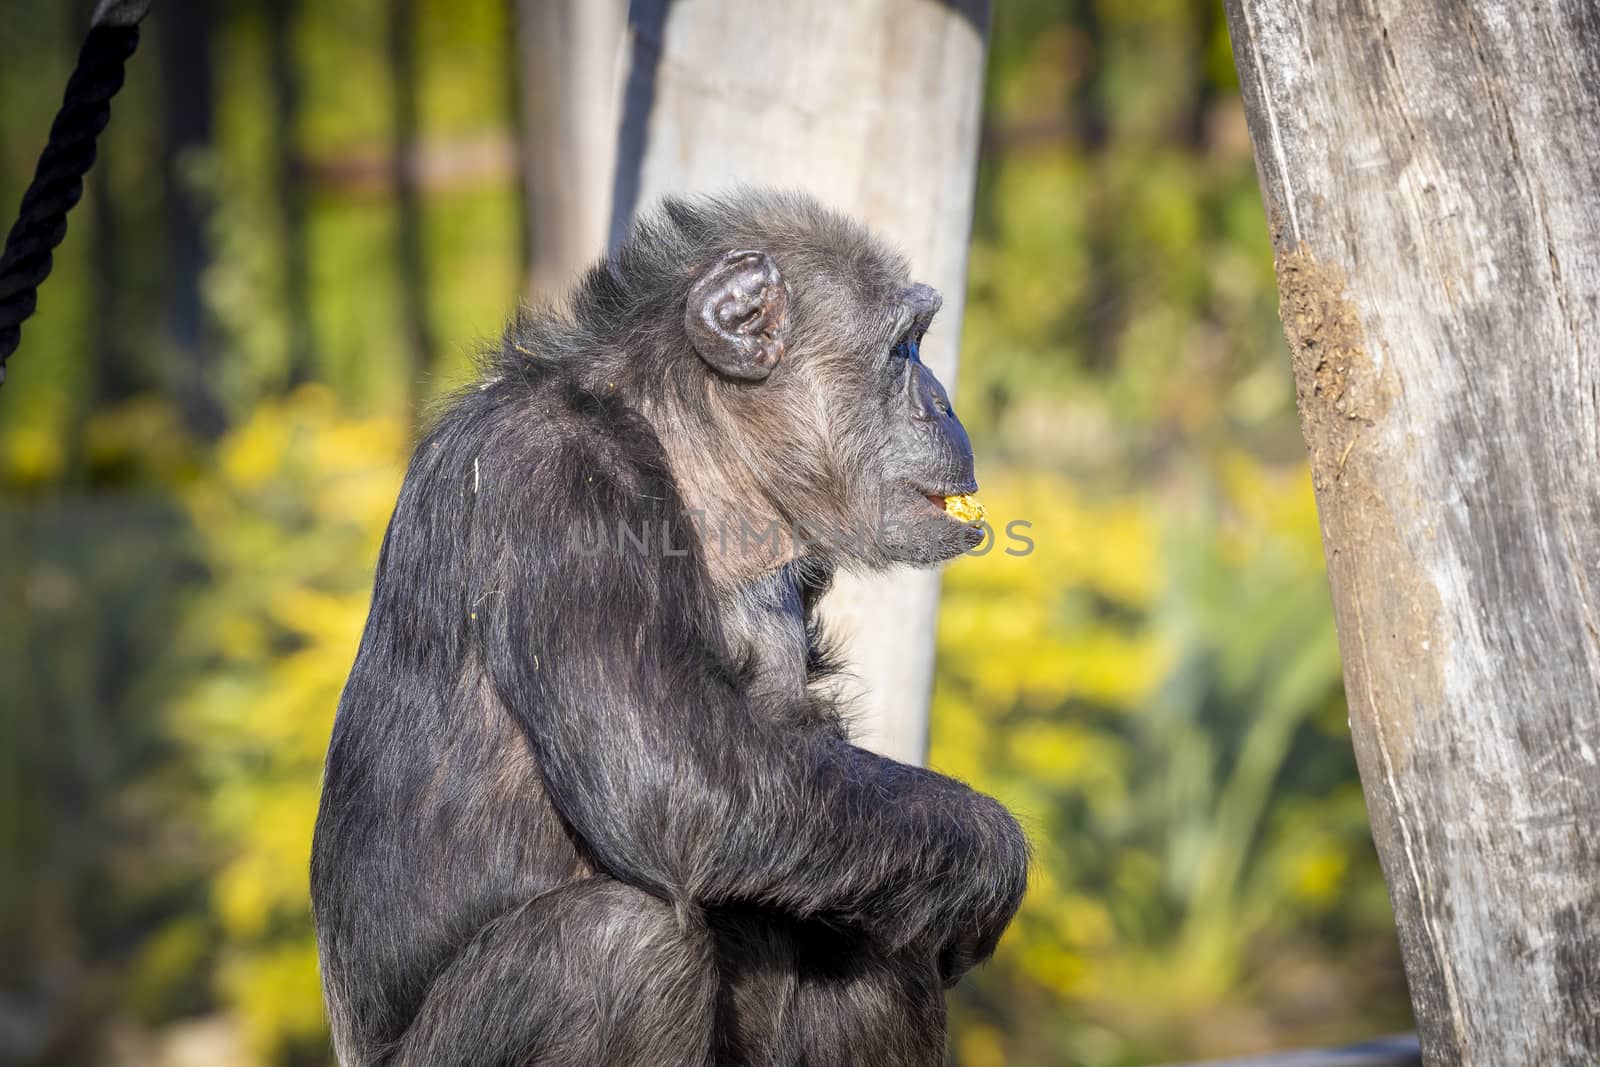 A Chimpanzee resting in the sunshine while looking into the distance by WittkePhotos